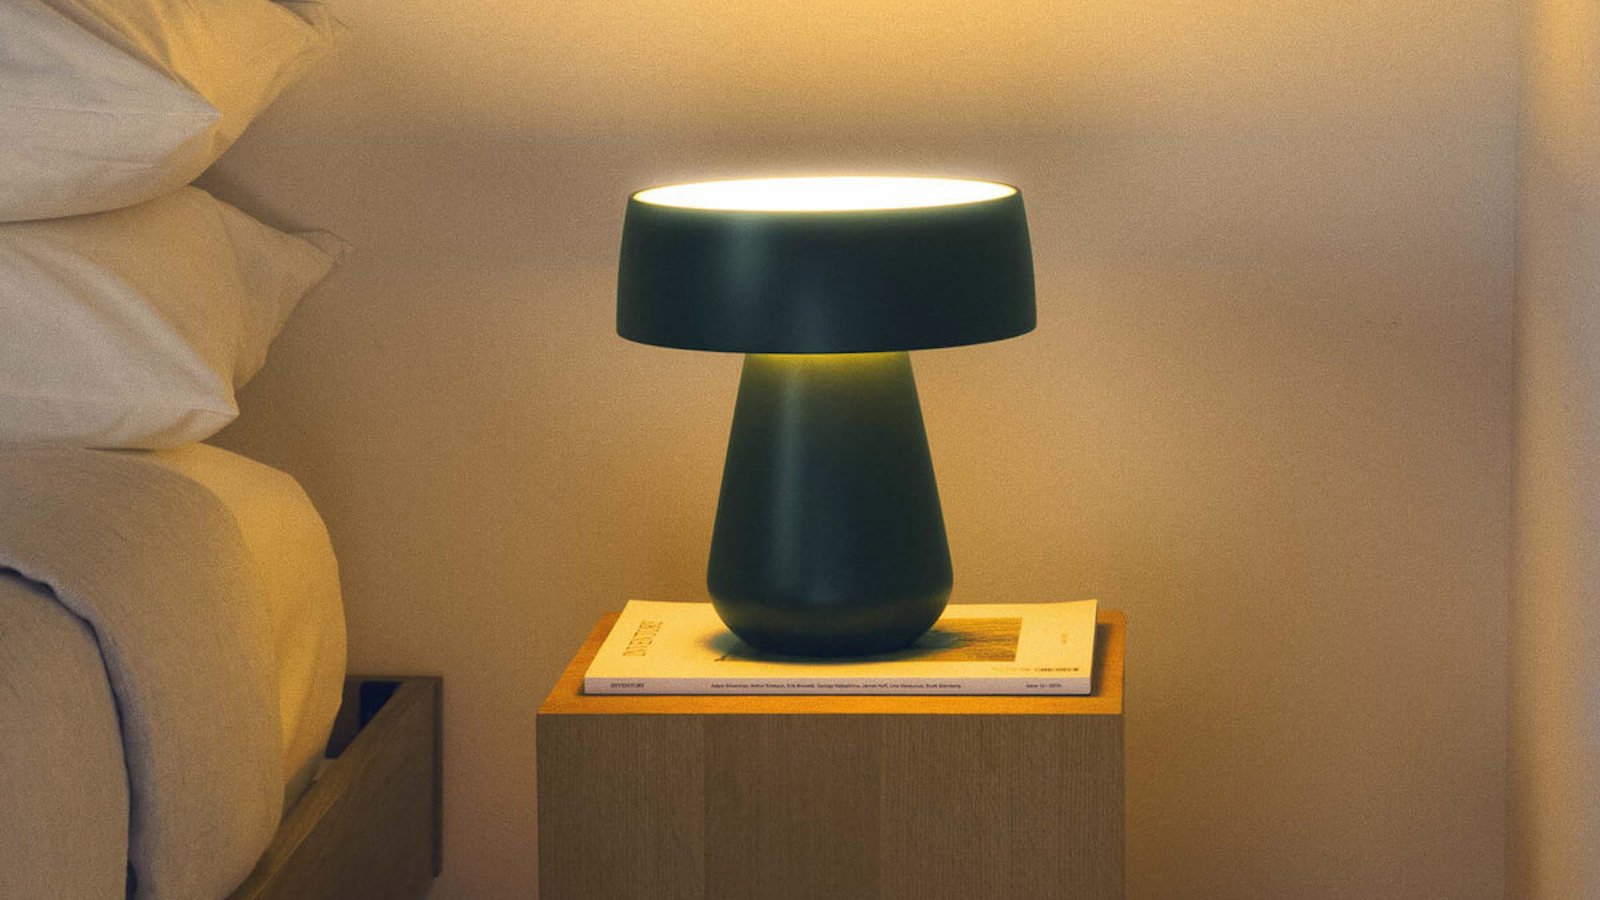 Gantri Hula Table Light is a careful collaboration of both direct and indirect lighting